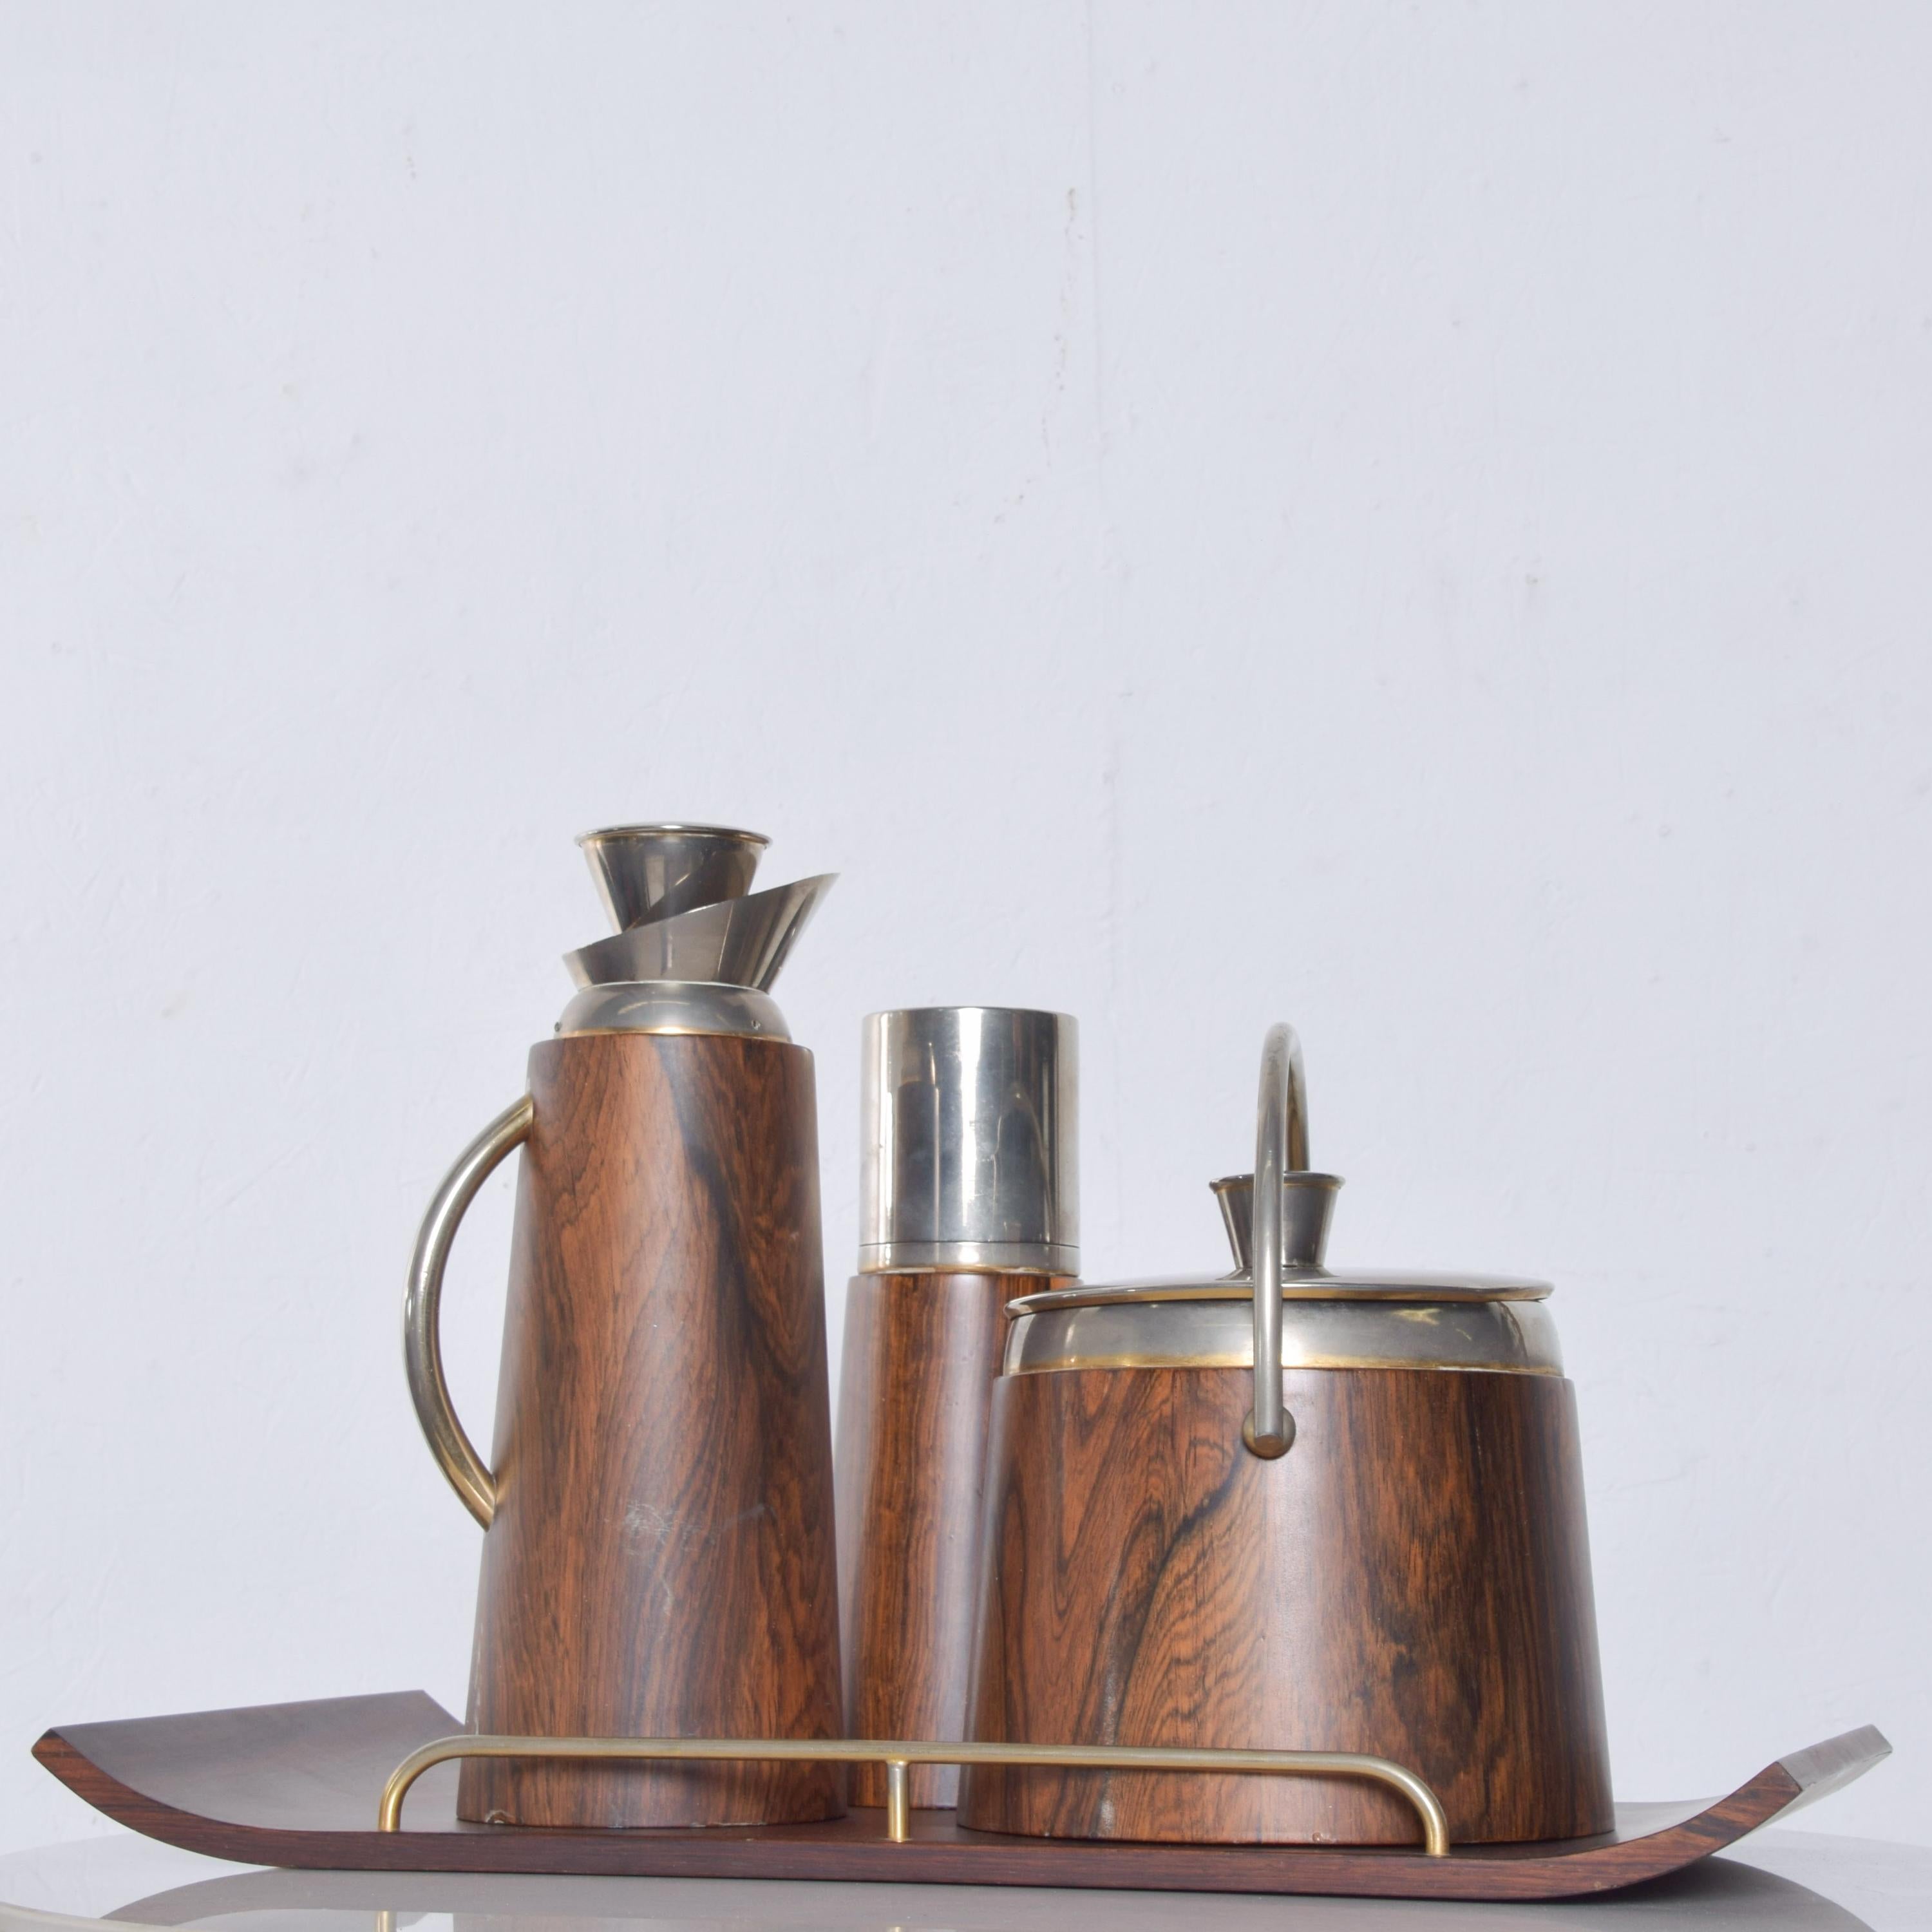 Aldo Tura modern cocktail bar set in rosewood and brass, Italy, 1950s
Fabulous elegance from Midcentury, Italy
No maker label is visible.
Includes: Tray, ice bucket with lid, shaker, thermos carafe and tongs
Dimensions: Tray 19 1/2